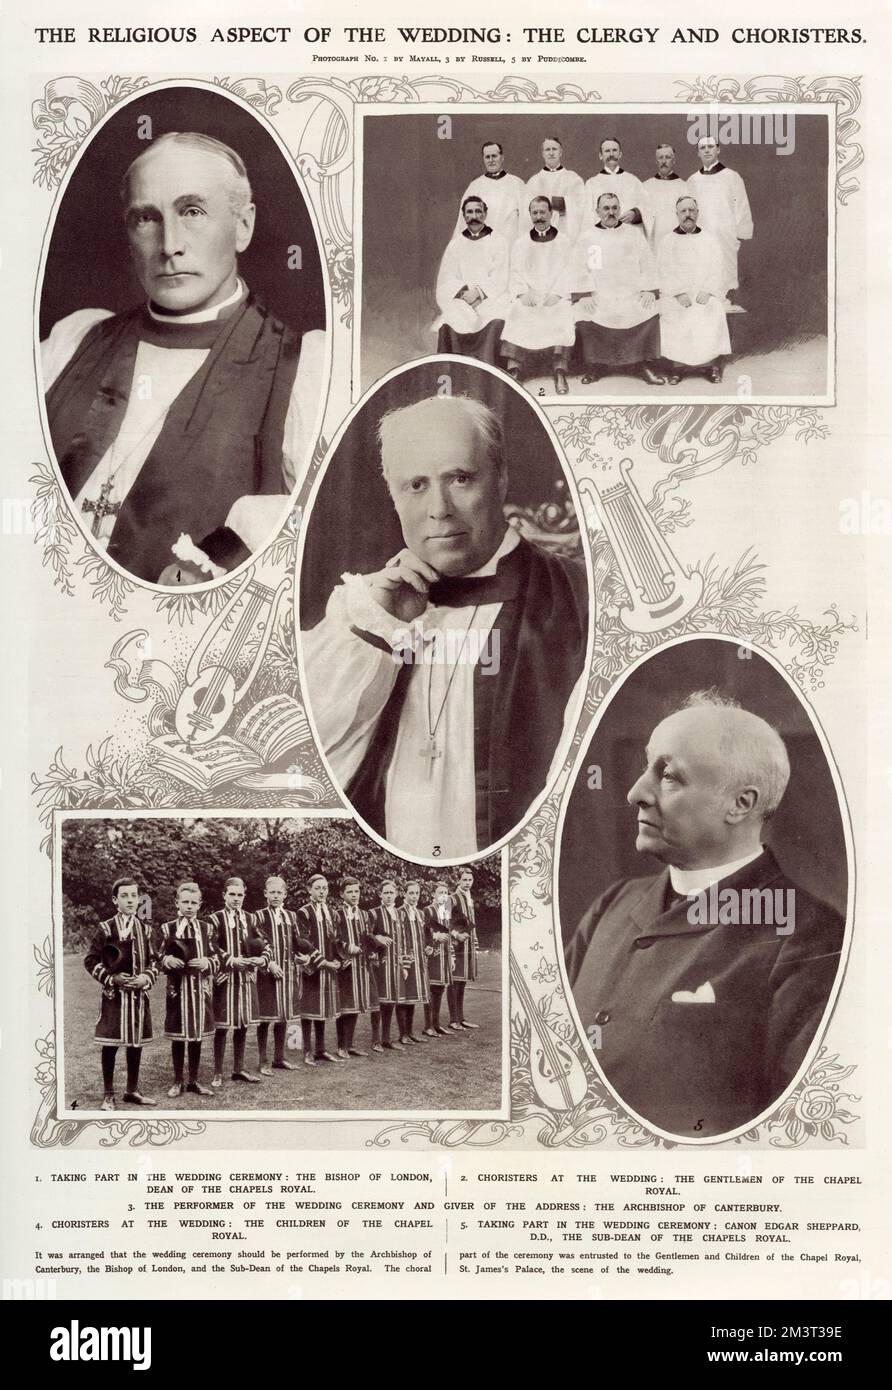 The religious aspect of the royal wedding of 1913 between Prince Alexander of Teck and Princess Alexandra, Duchess of Fife. Top left, the Bishop of London, taking part in the ceremony as Dean of the Chapels Royal. Top right, choristers at the wedding - the gentlemen of the Chapel Royal, centre, The Archbishop of Canterbury, bottom left, choristers at the wedding, the children of the Chapel Royal and bottom right, Canon Edgar Sheppard, the Sub-Dean of the Chapels Royal. Stock Photo